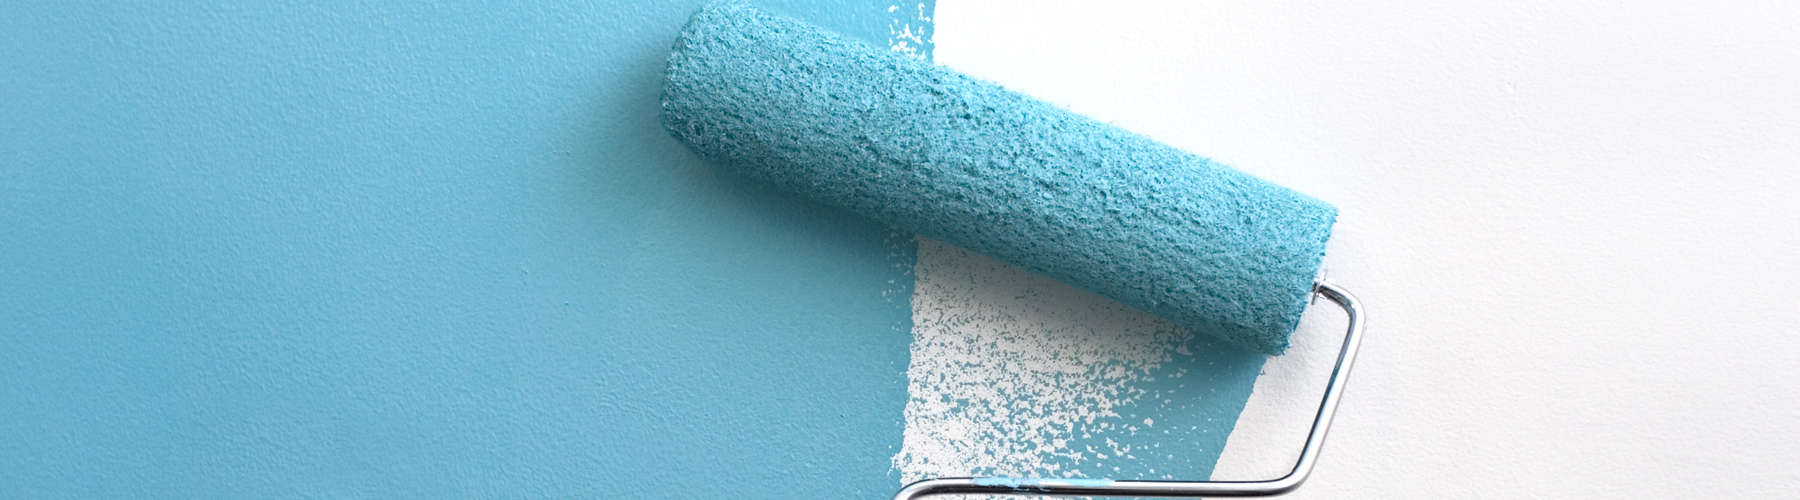 A paint roller covered in teal blue paint, painting over an interior white wall.